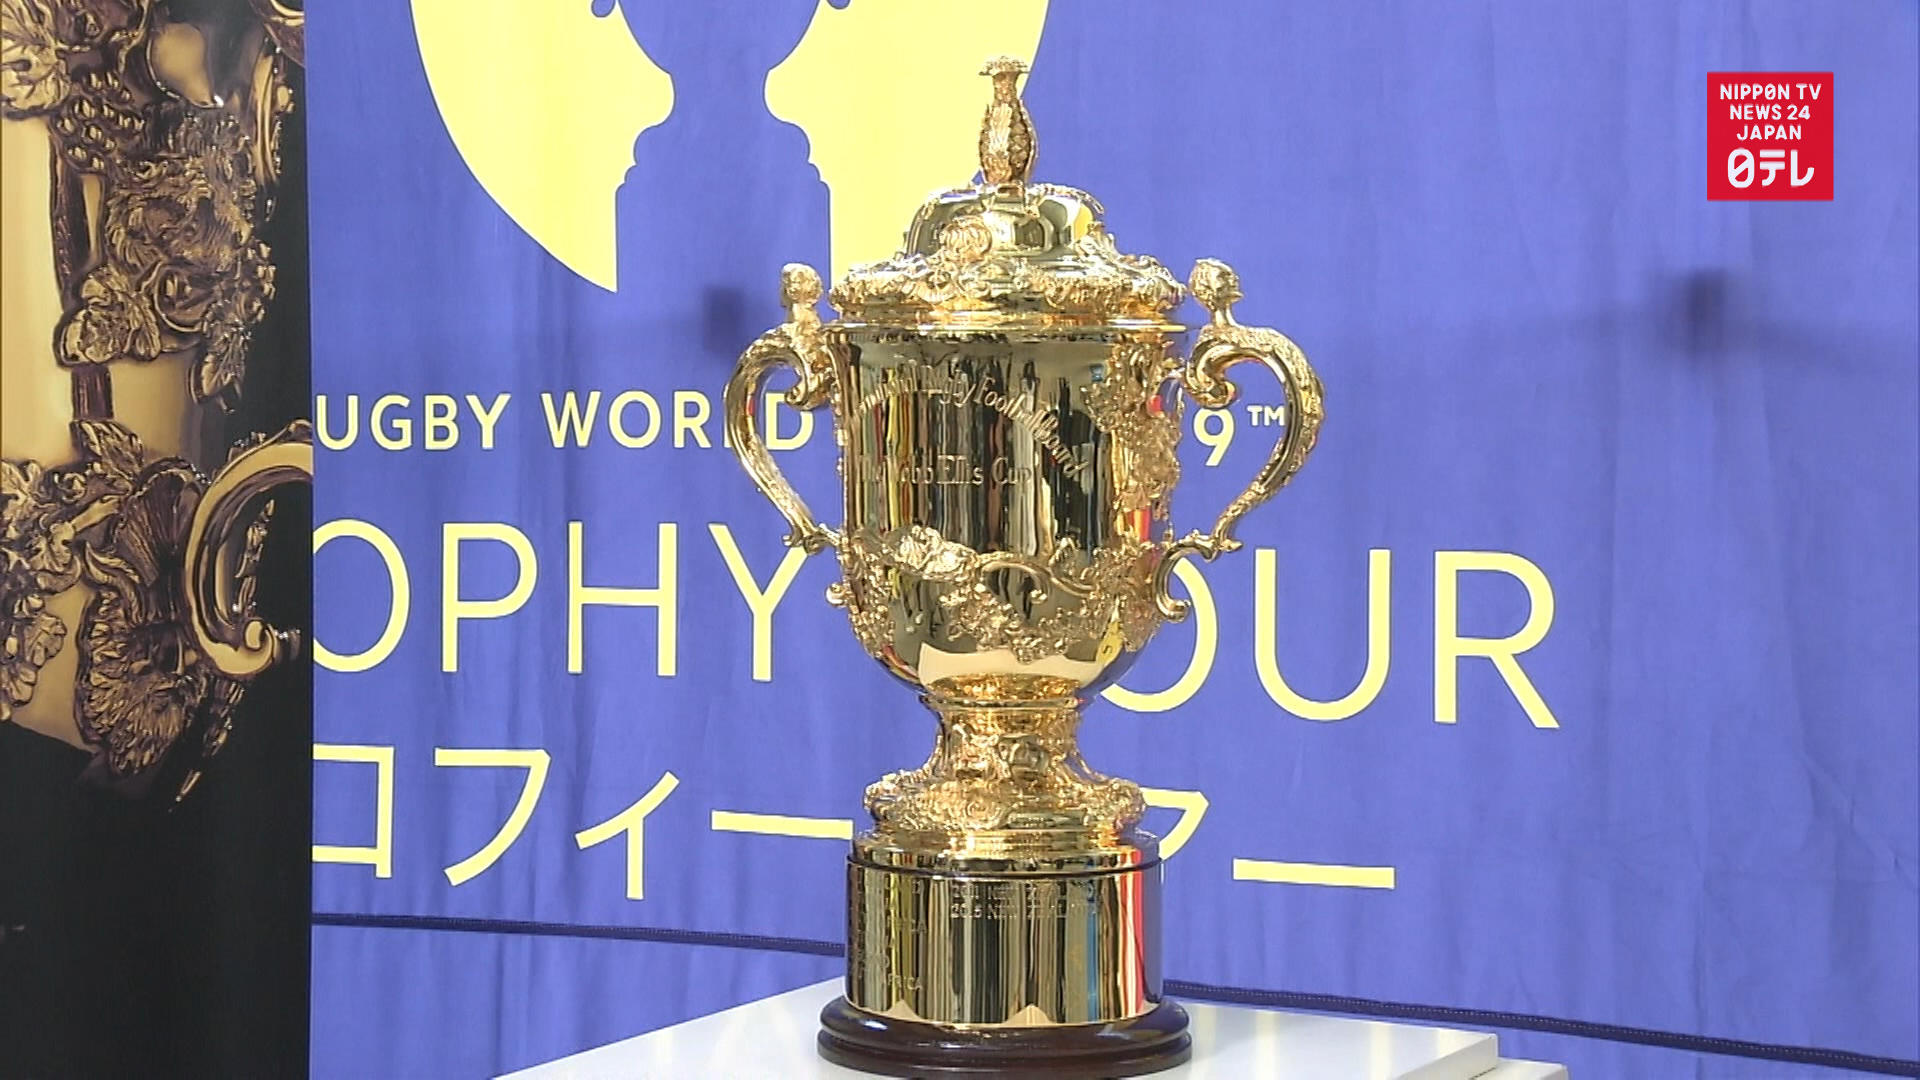 Rugby World Cup trophy on display in Tokyo